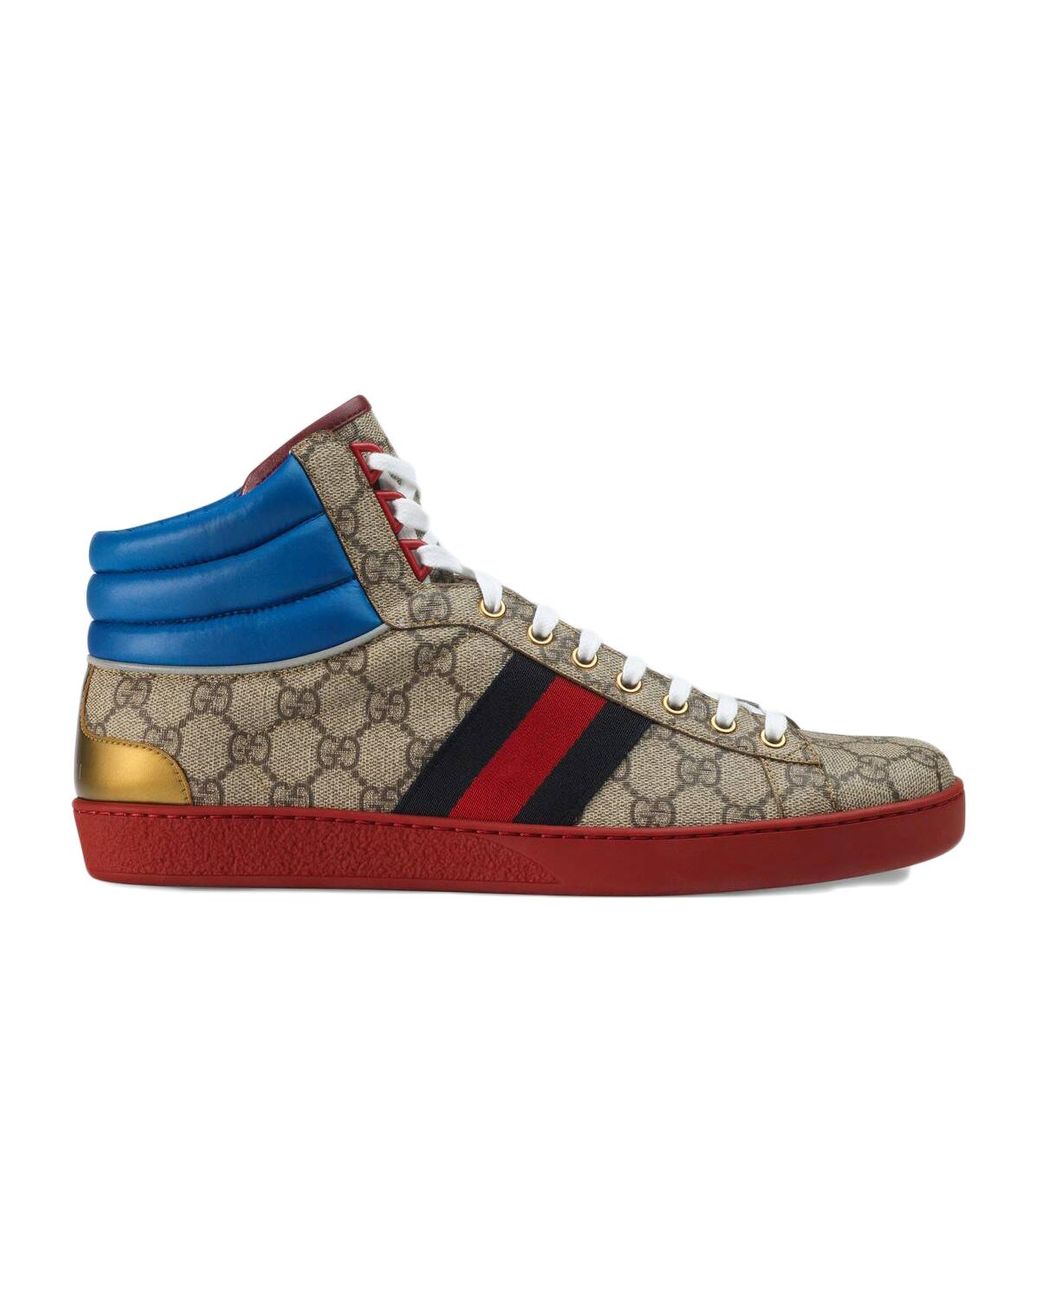 Gucci Ace GG High Top Beige Ebony in Natural for Men - Lyst